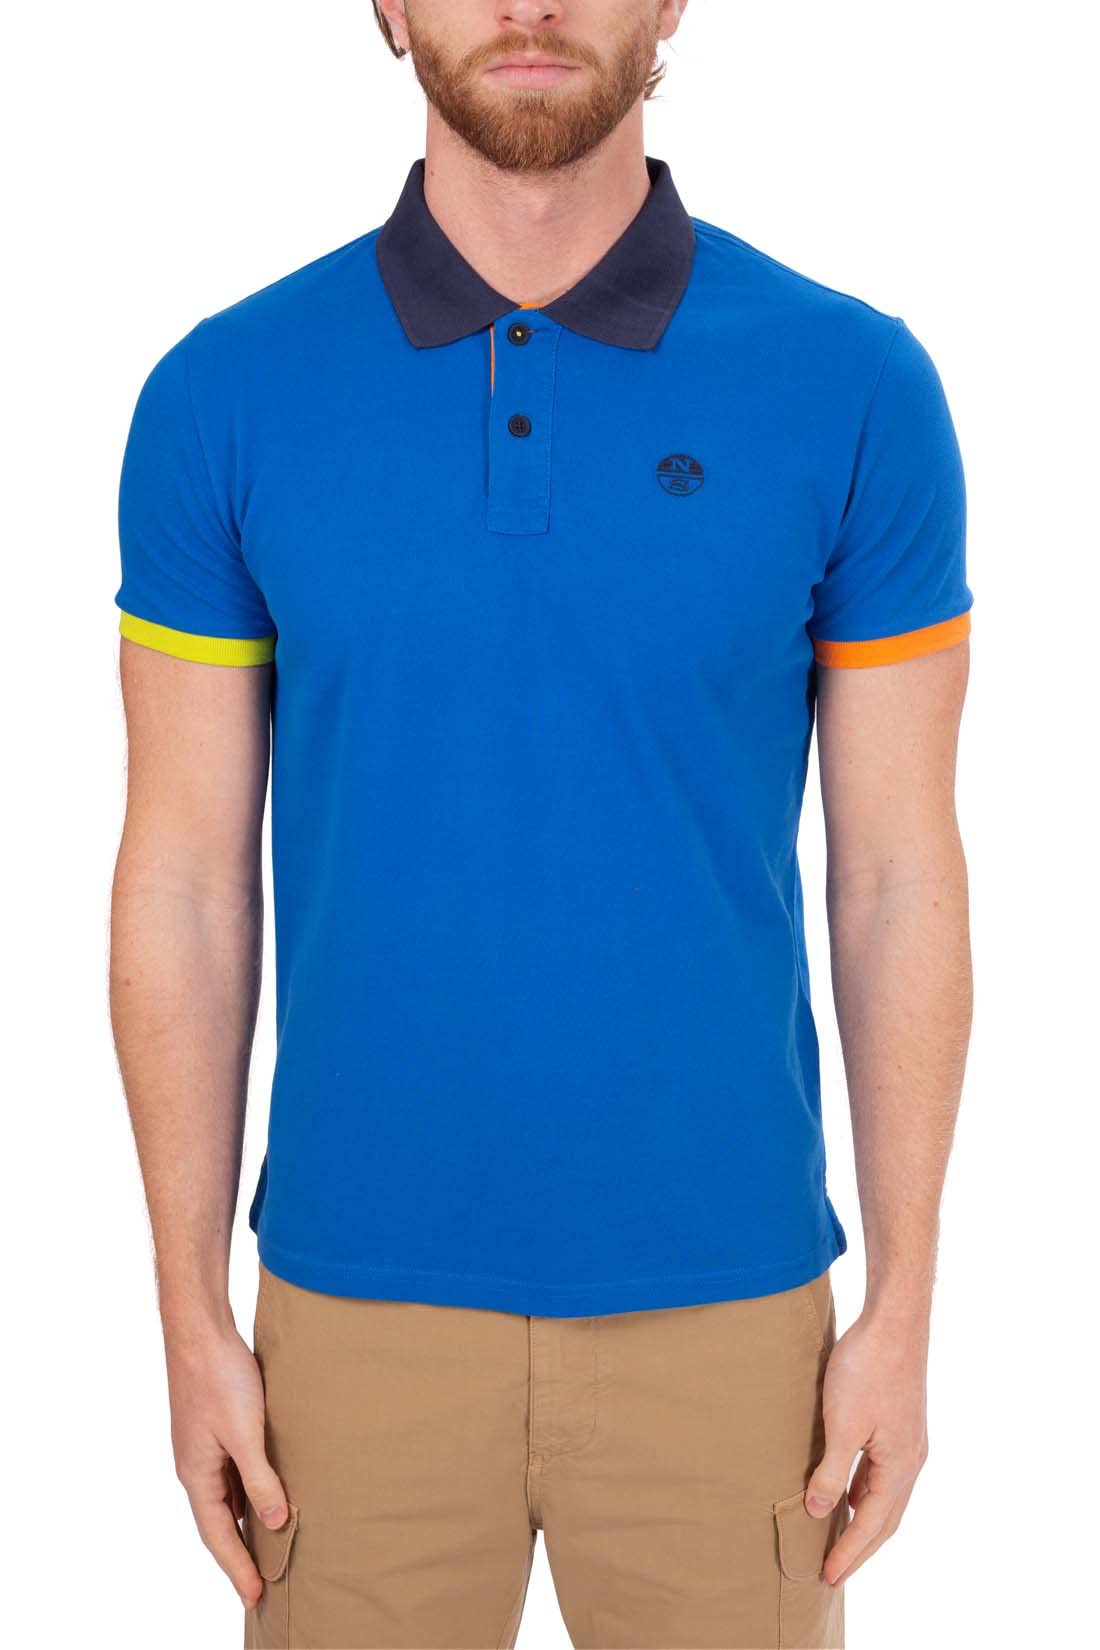 NORTH SAILS - Men's regular polo shirt with colorblock details - Size M